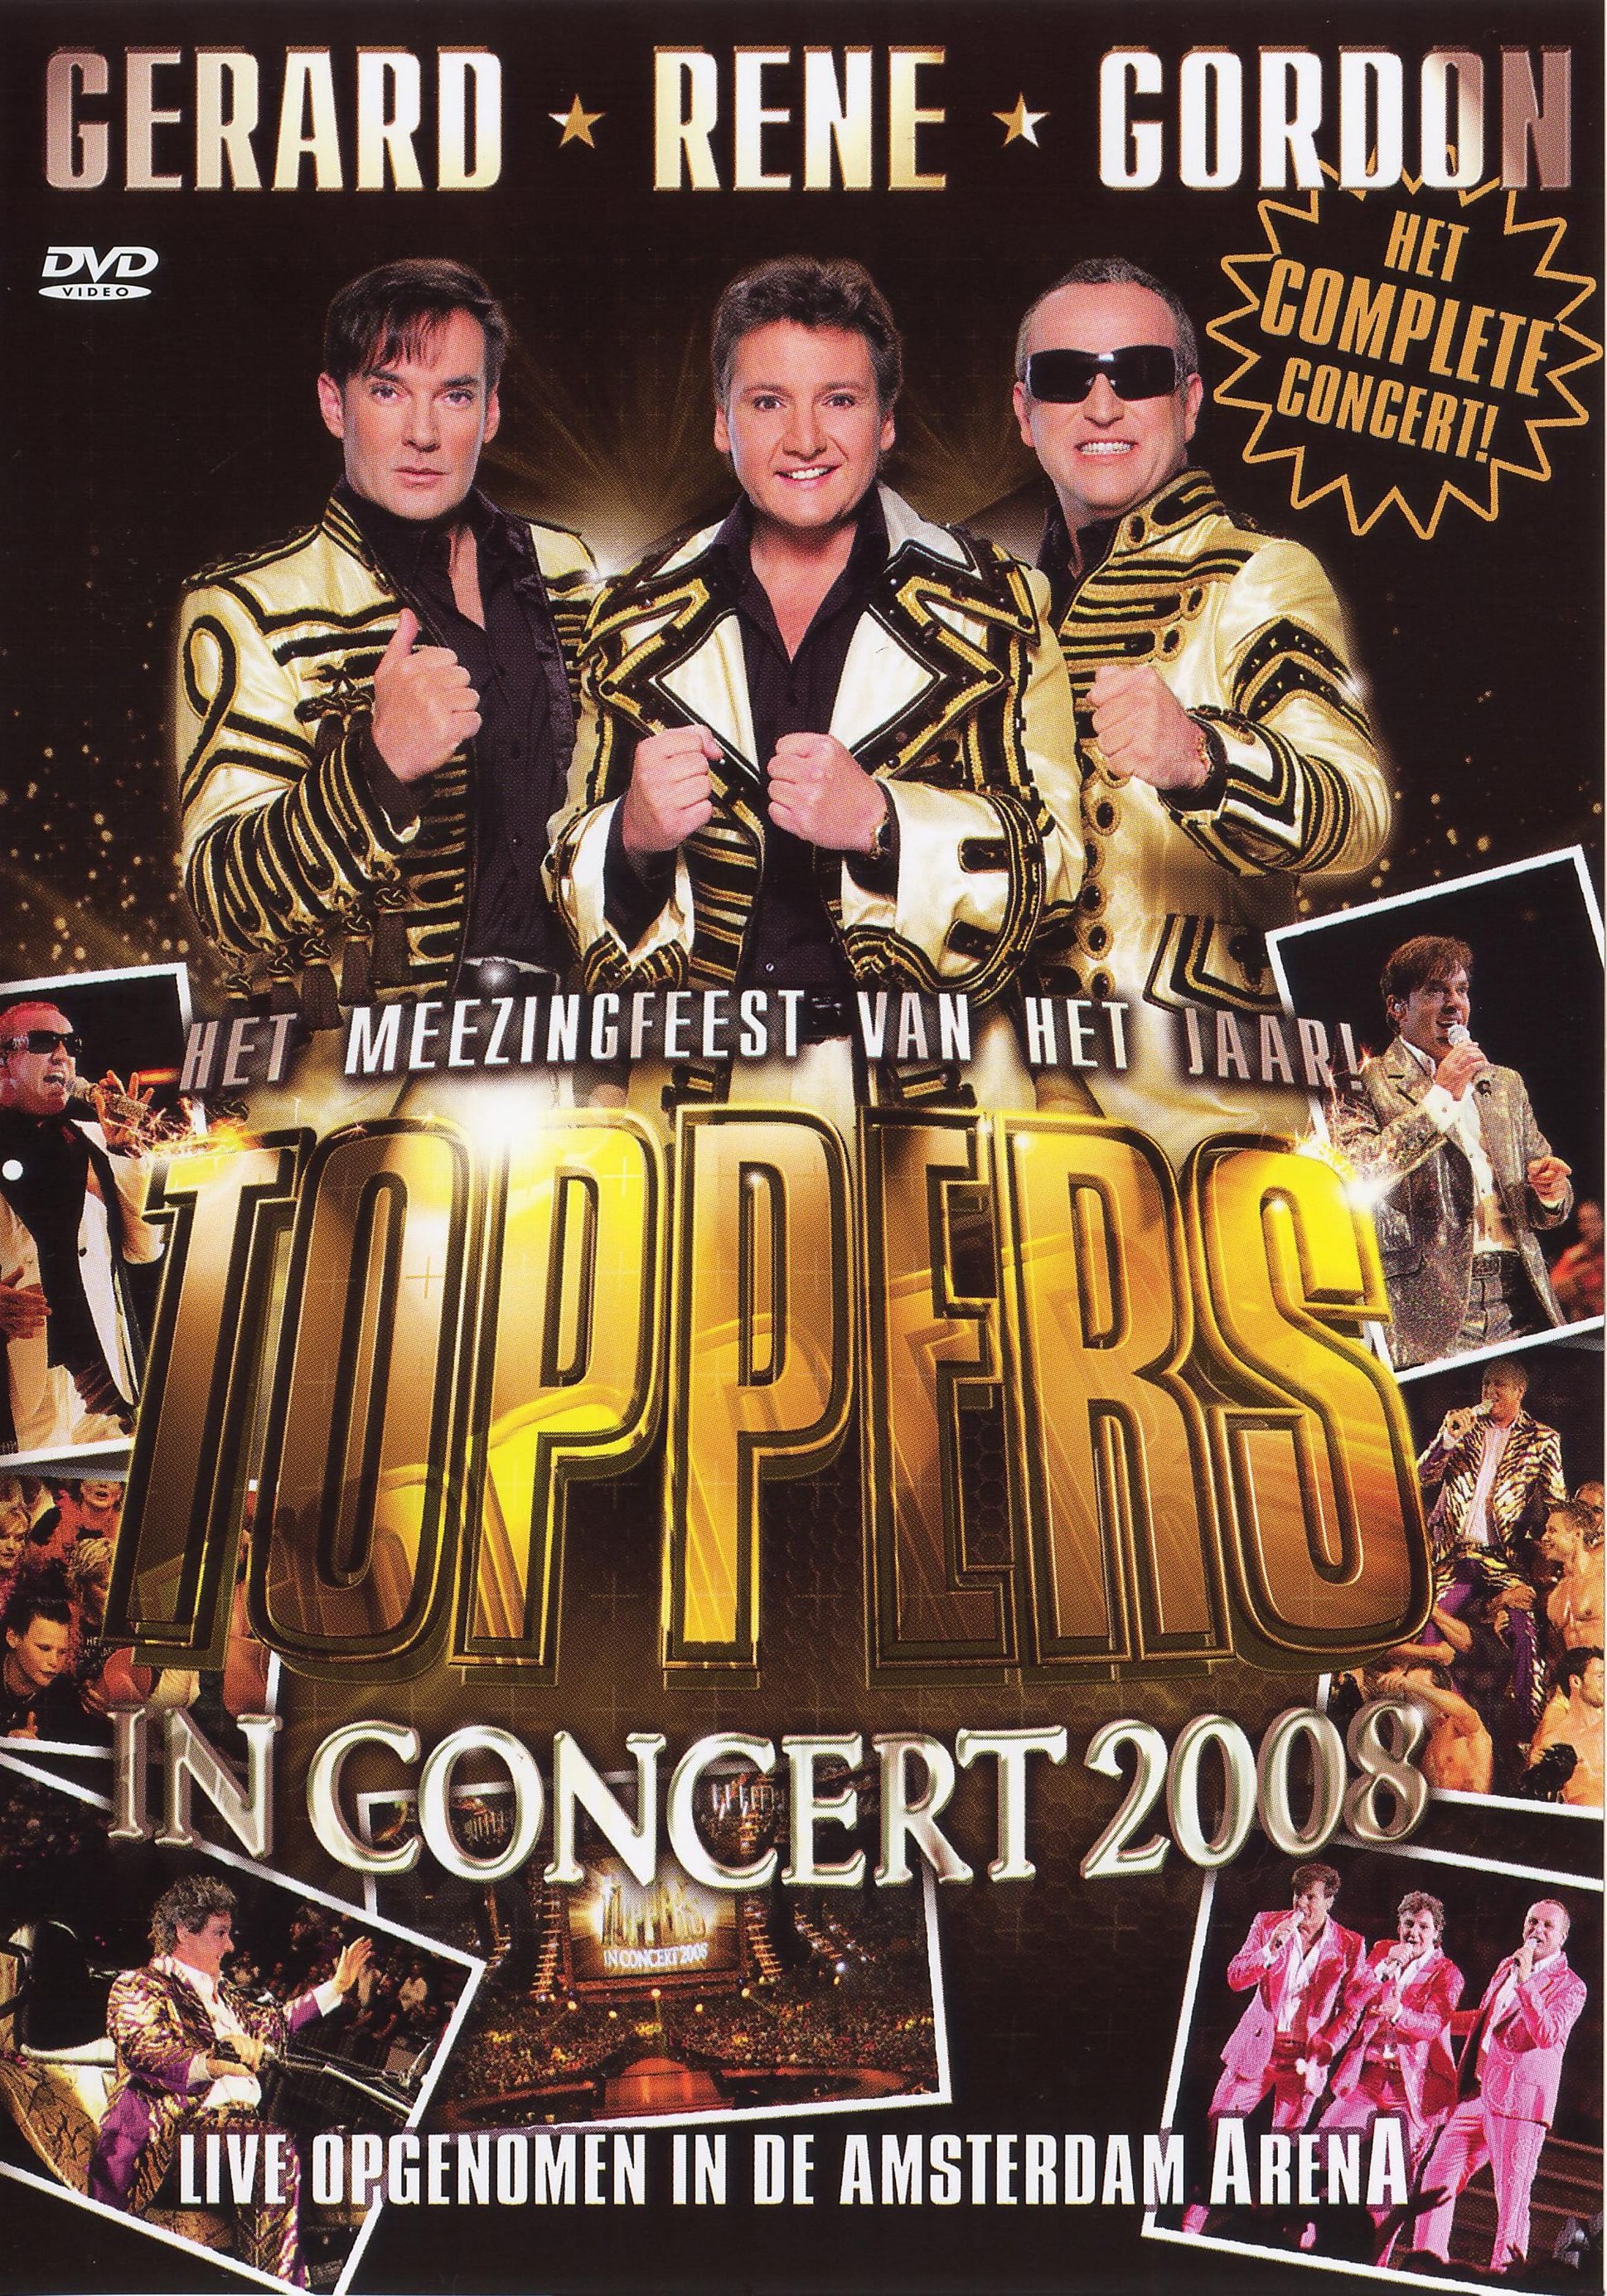 Toppers in concert 2008